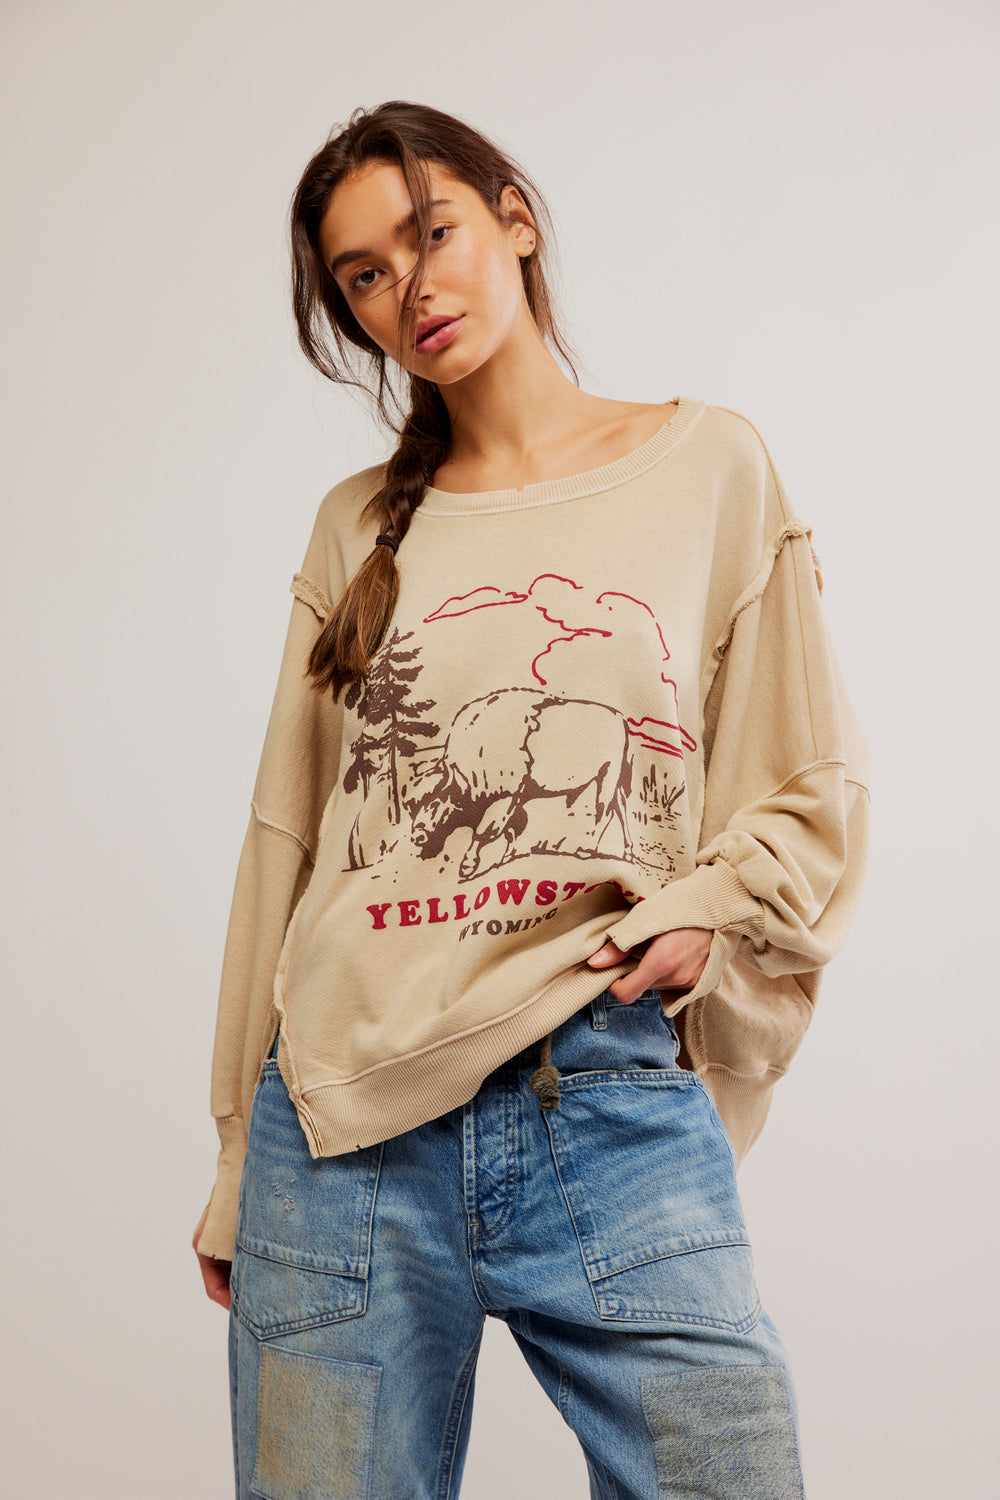 Free People Graphic Camden Pullover